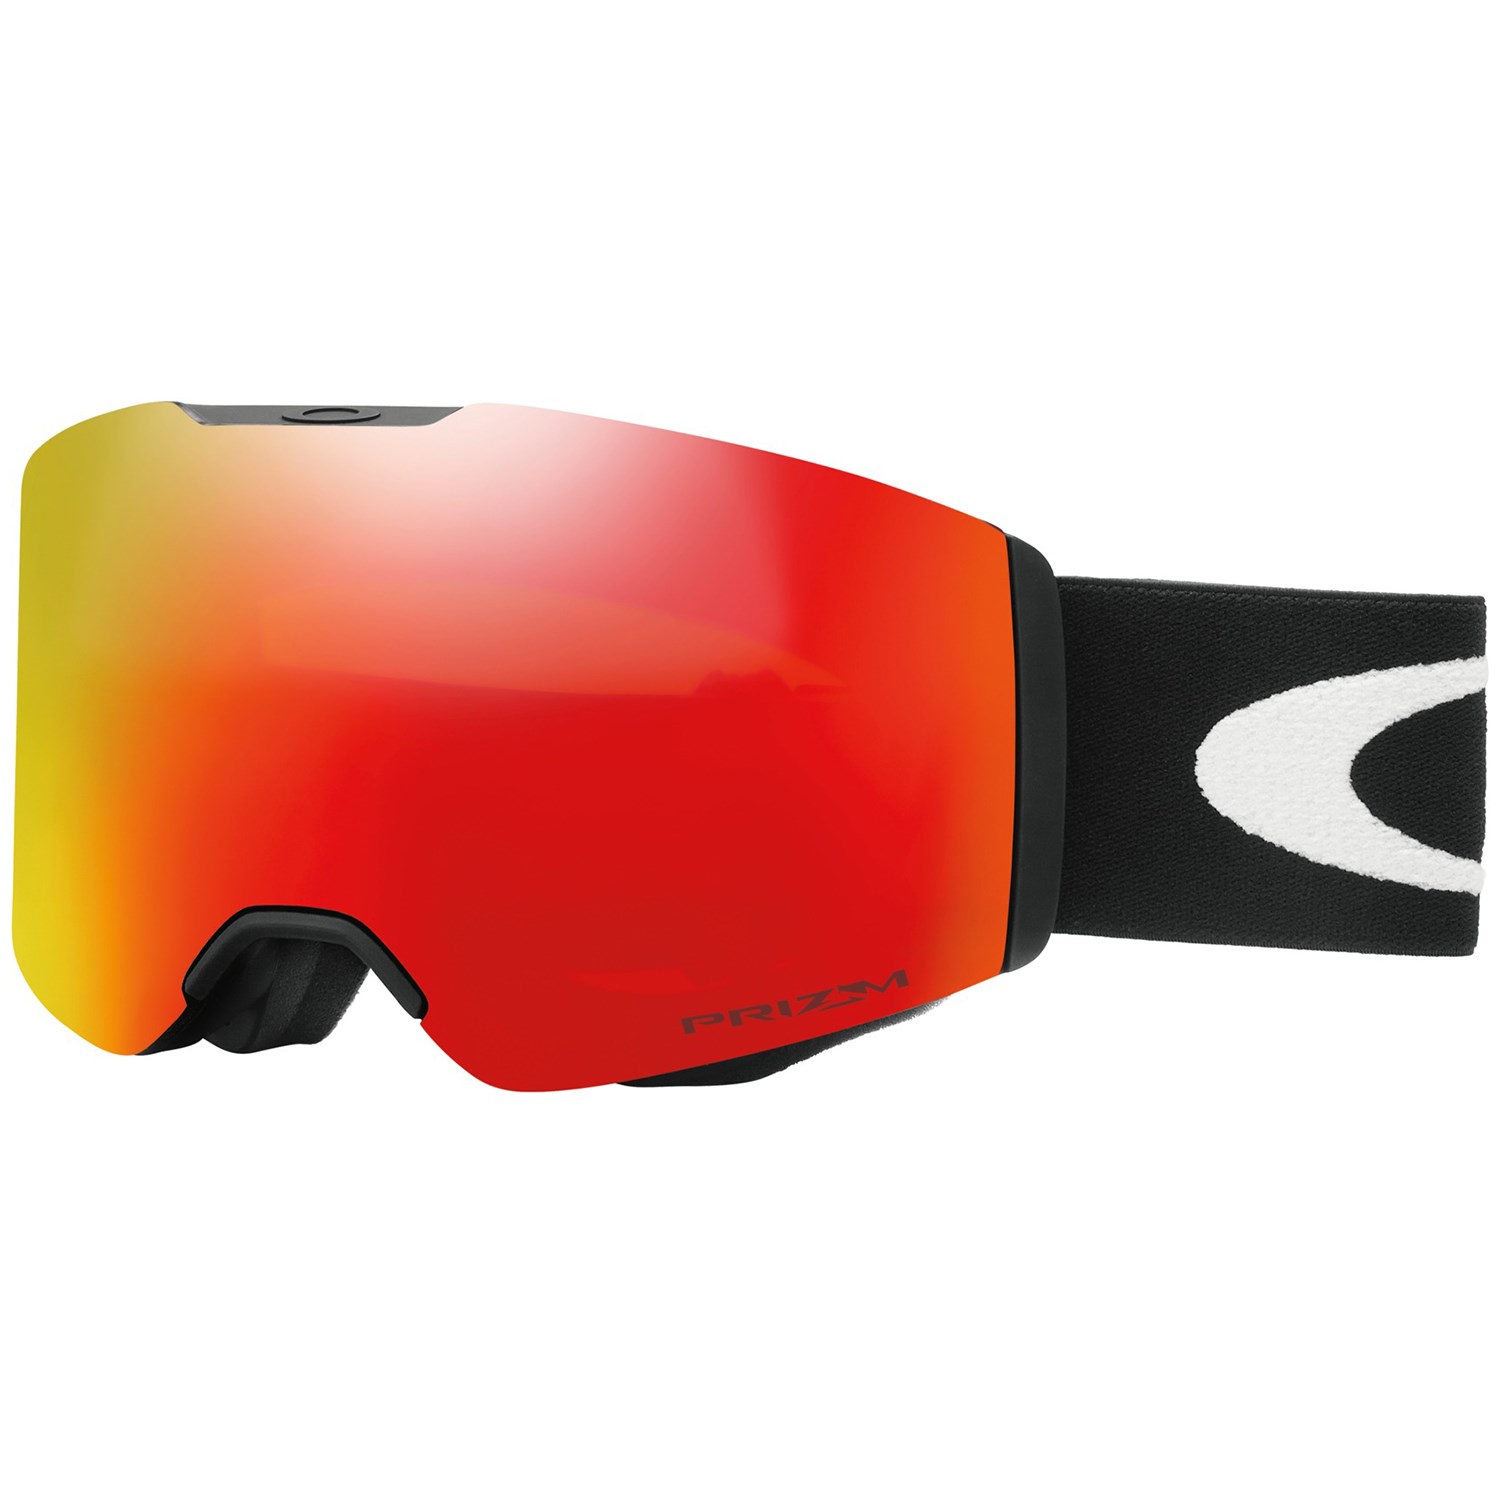 Oakley Fall Line Asian Fit Goggles